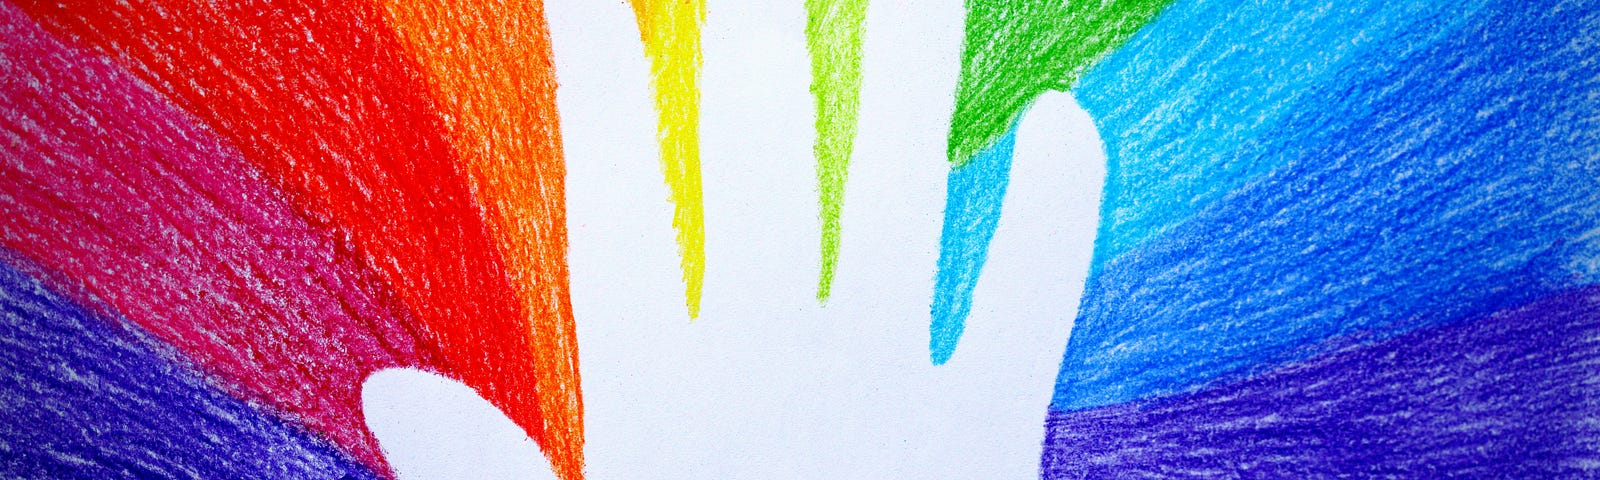 An image of a white hand against a rainbow coloured background, drawn with coloured pencils.